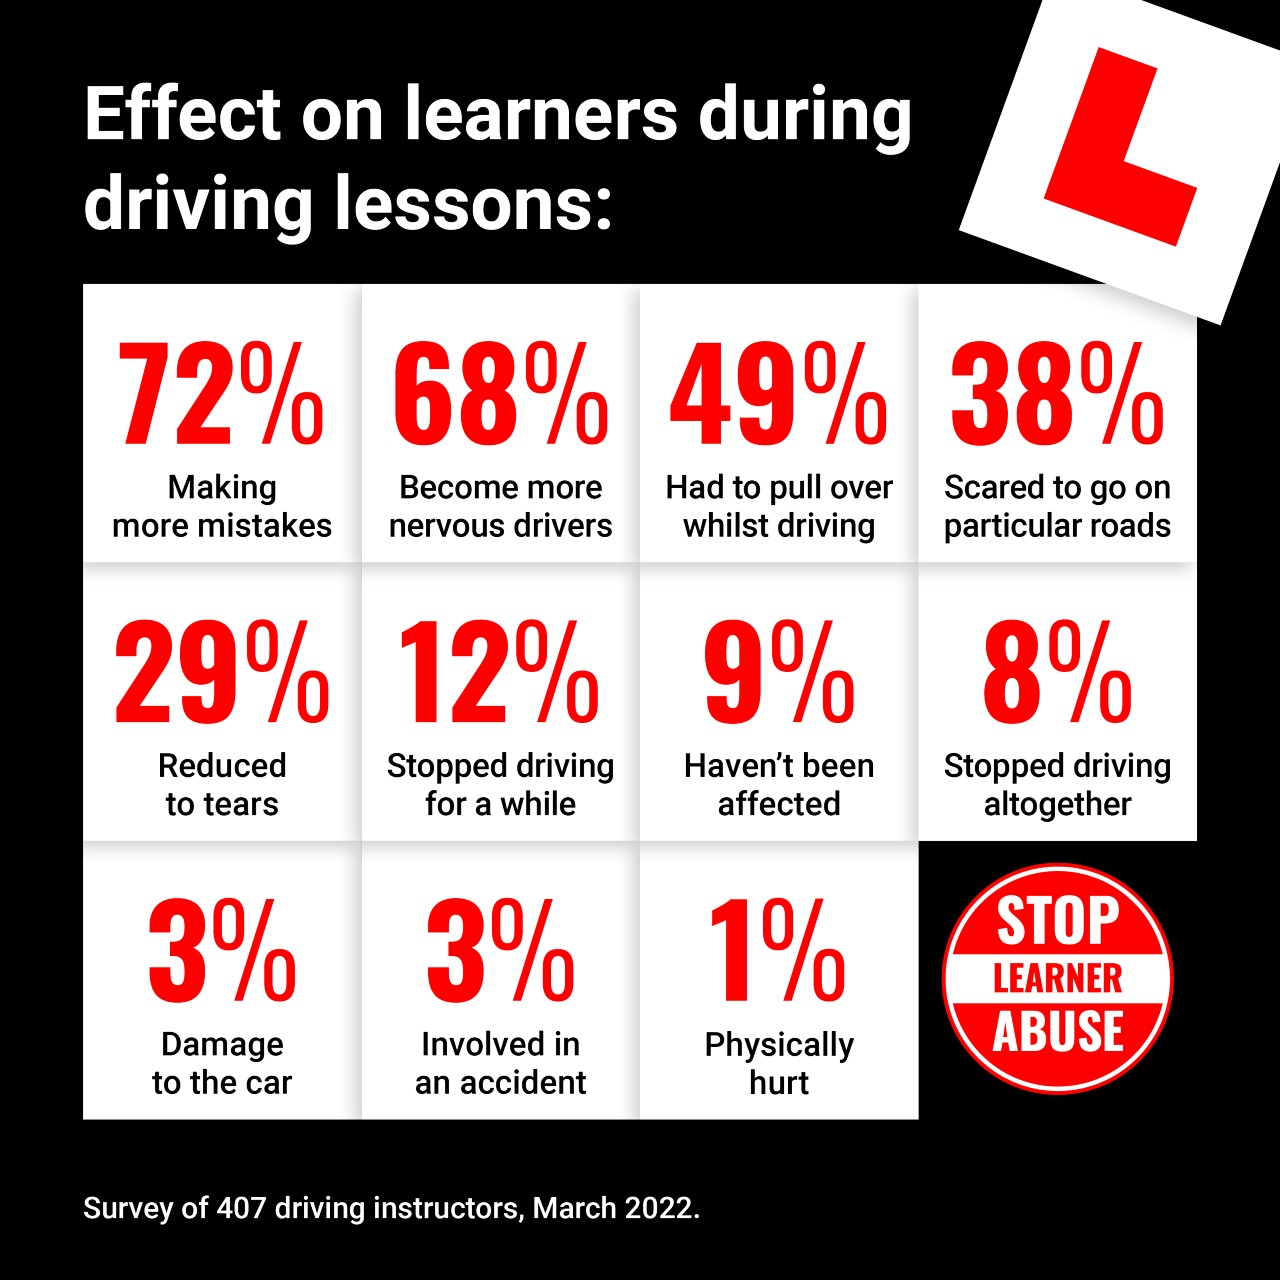 Effect of abuse on learners